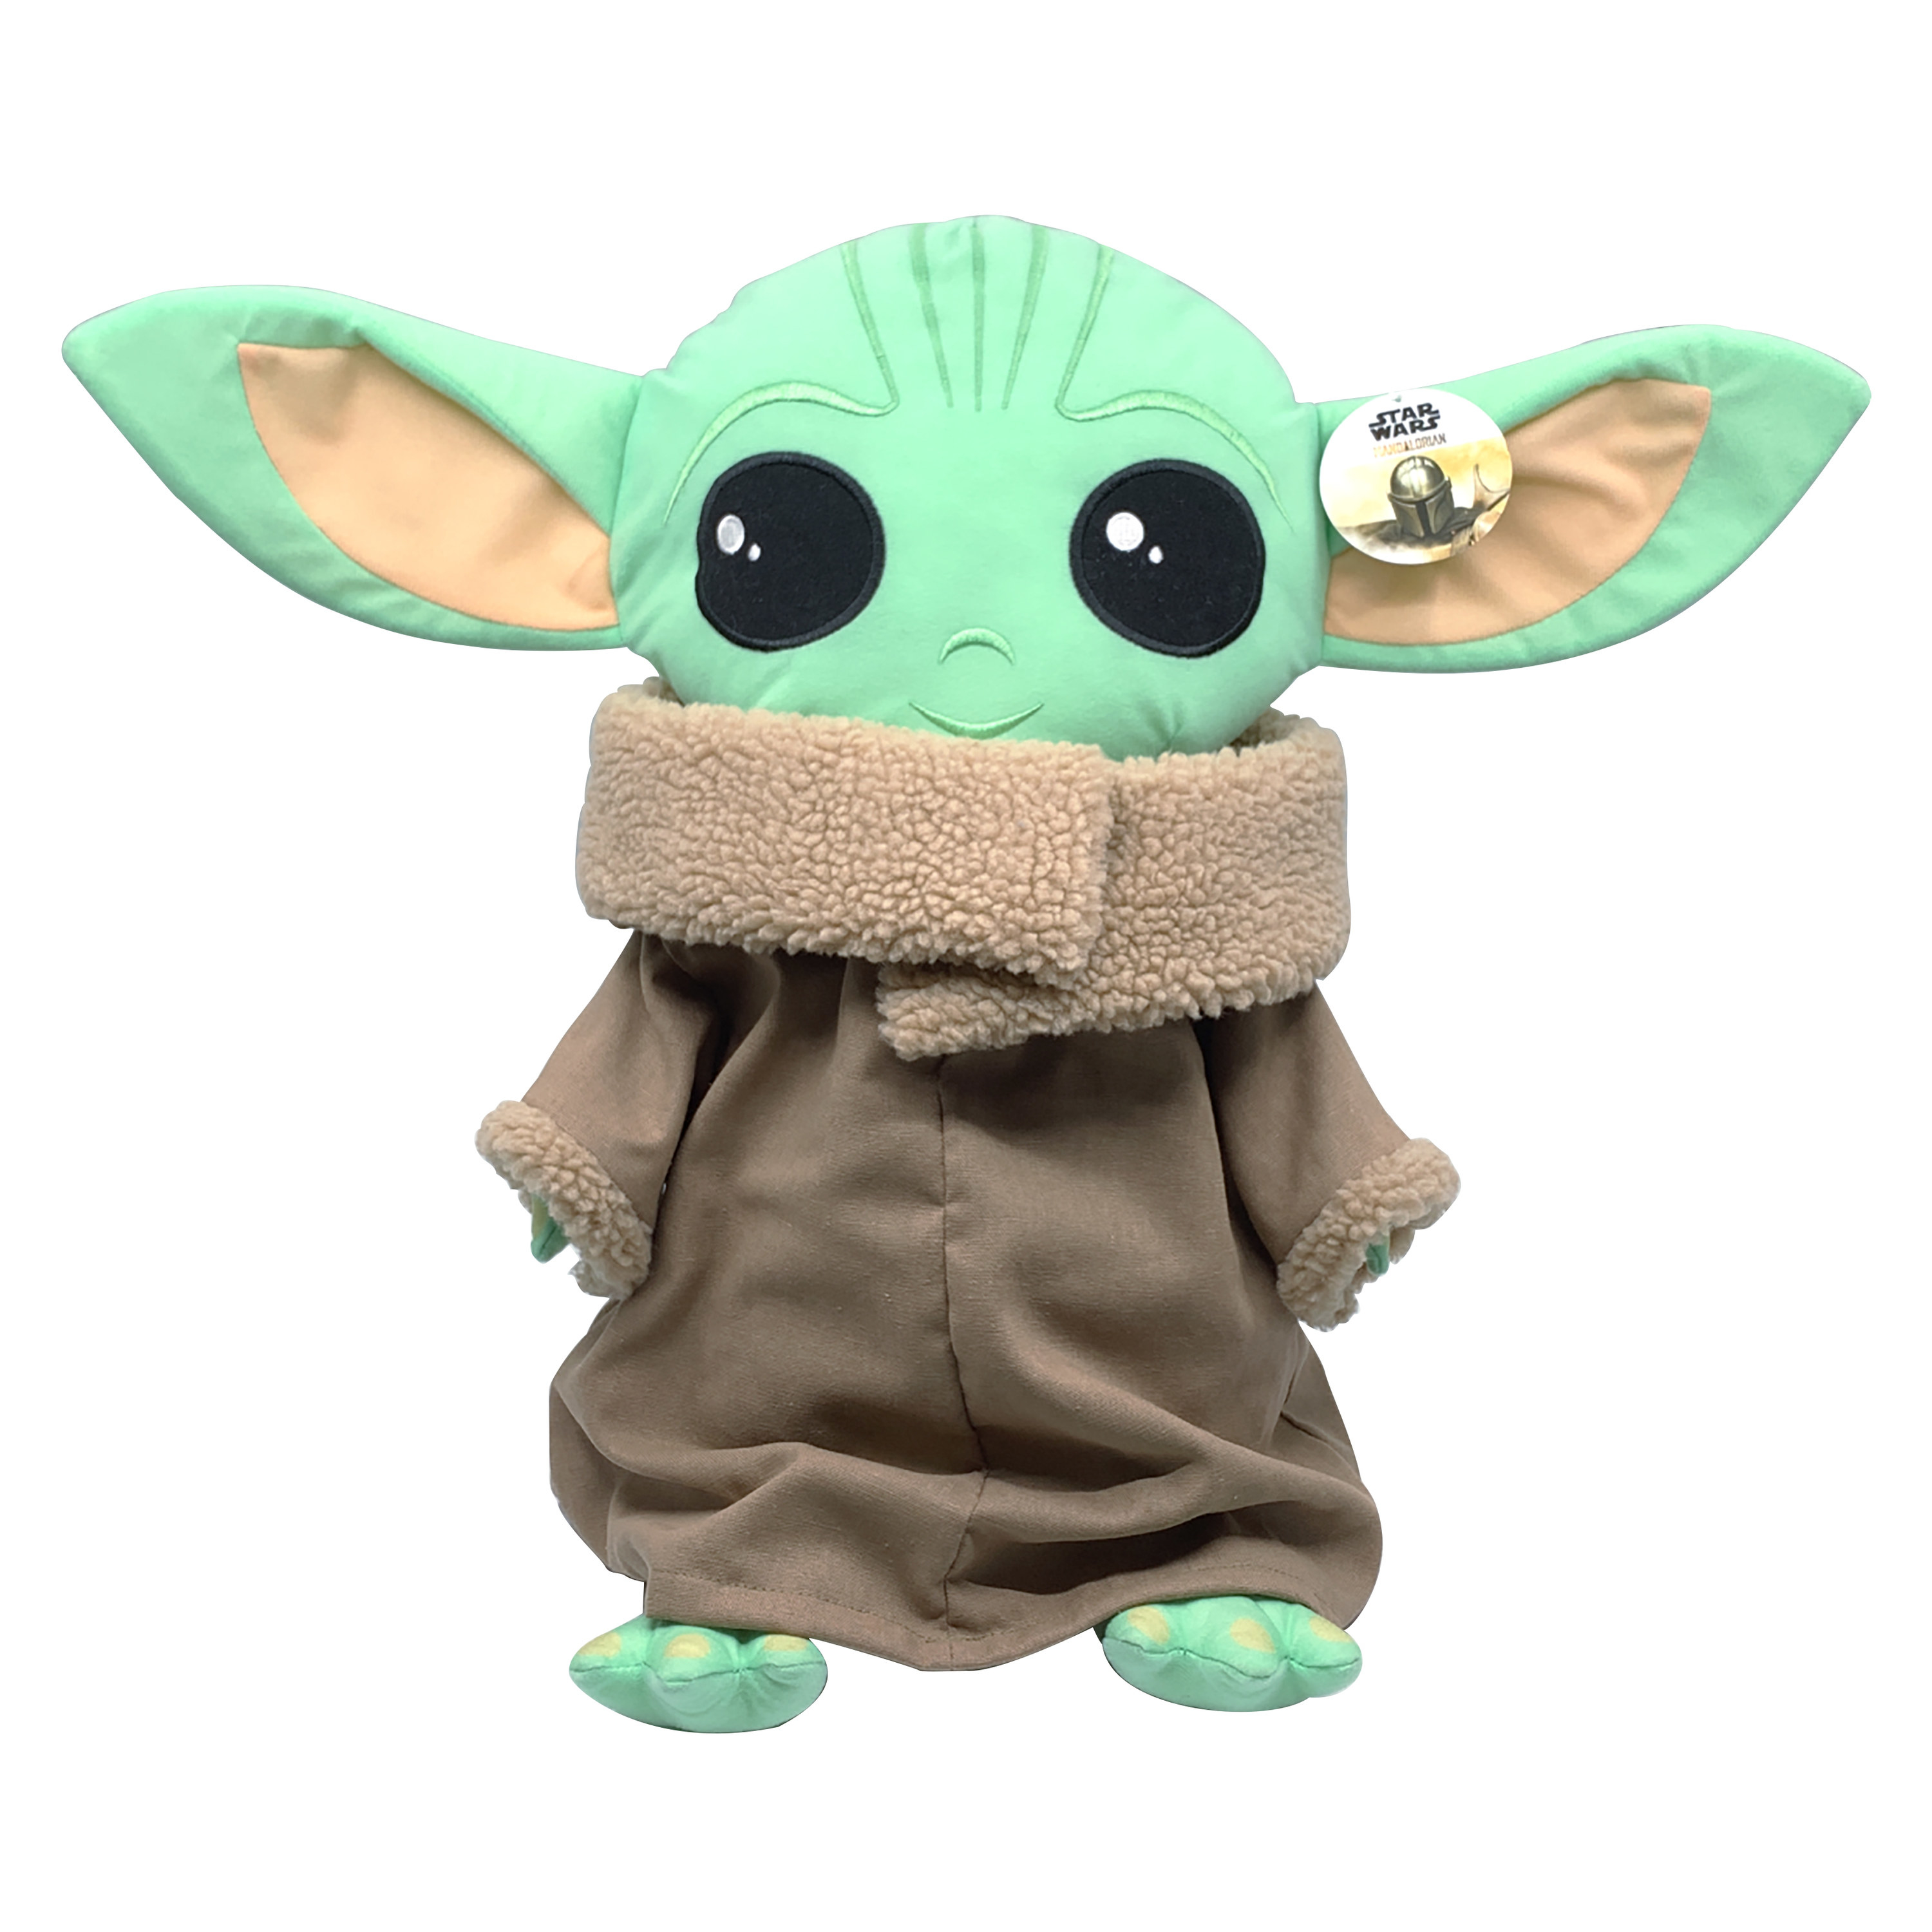 baby yoda pillow buddy with his signature outfit